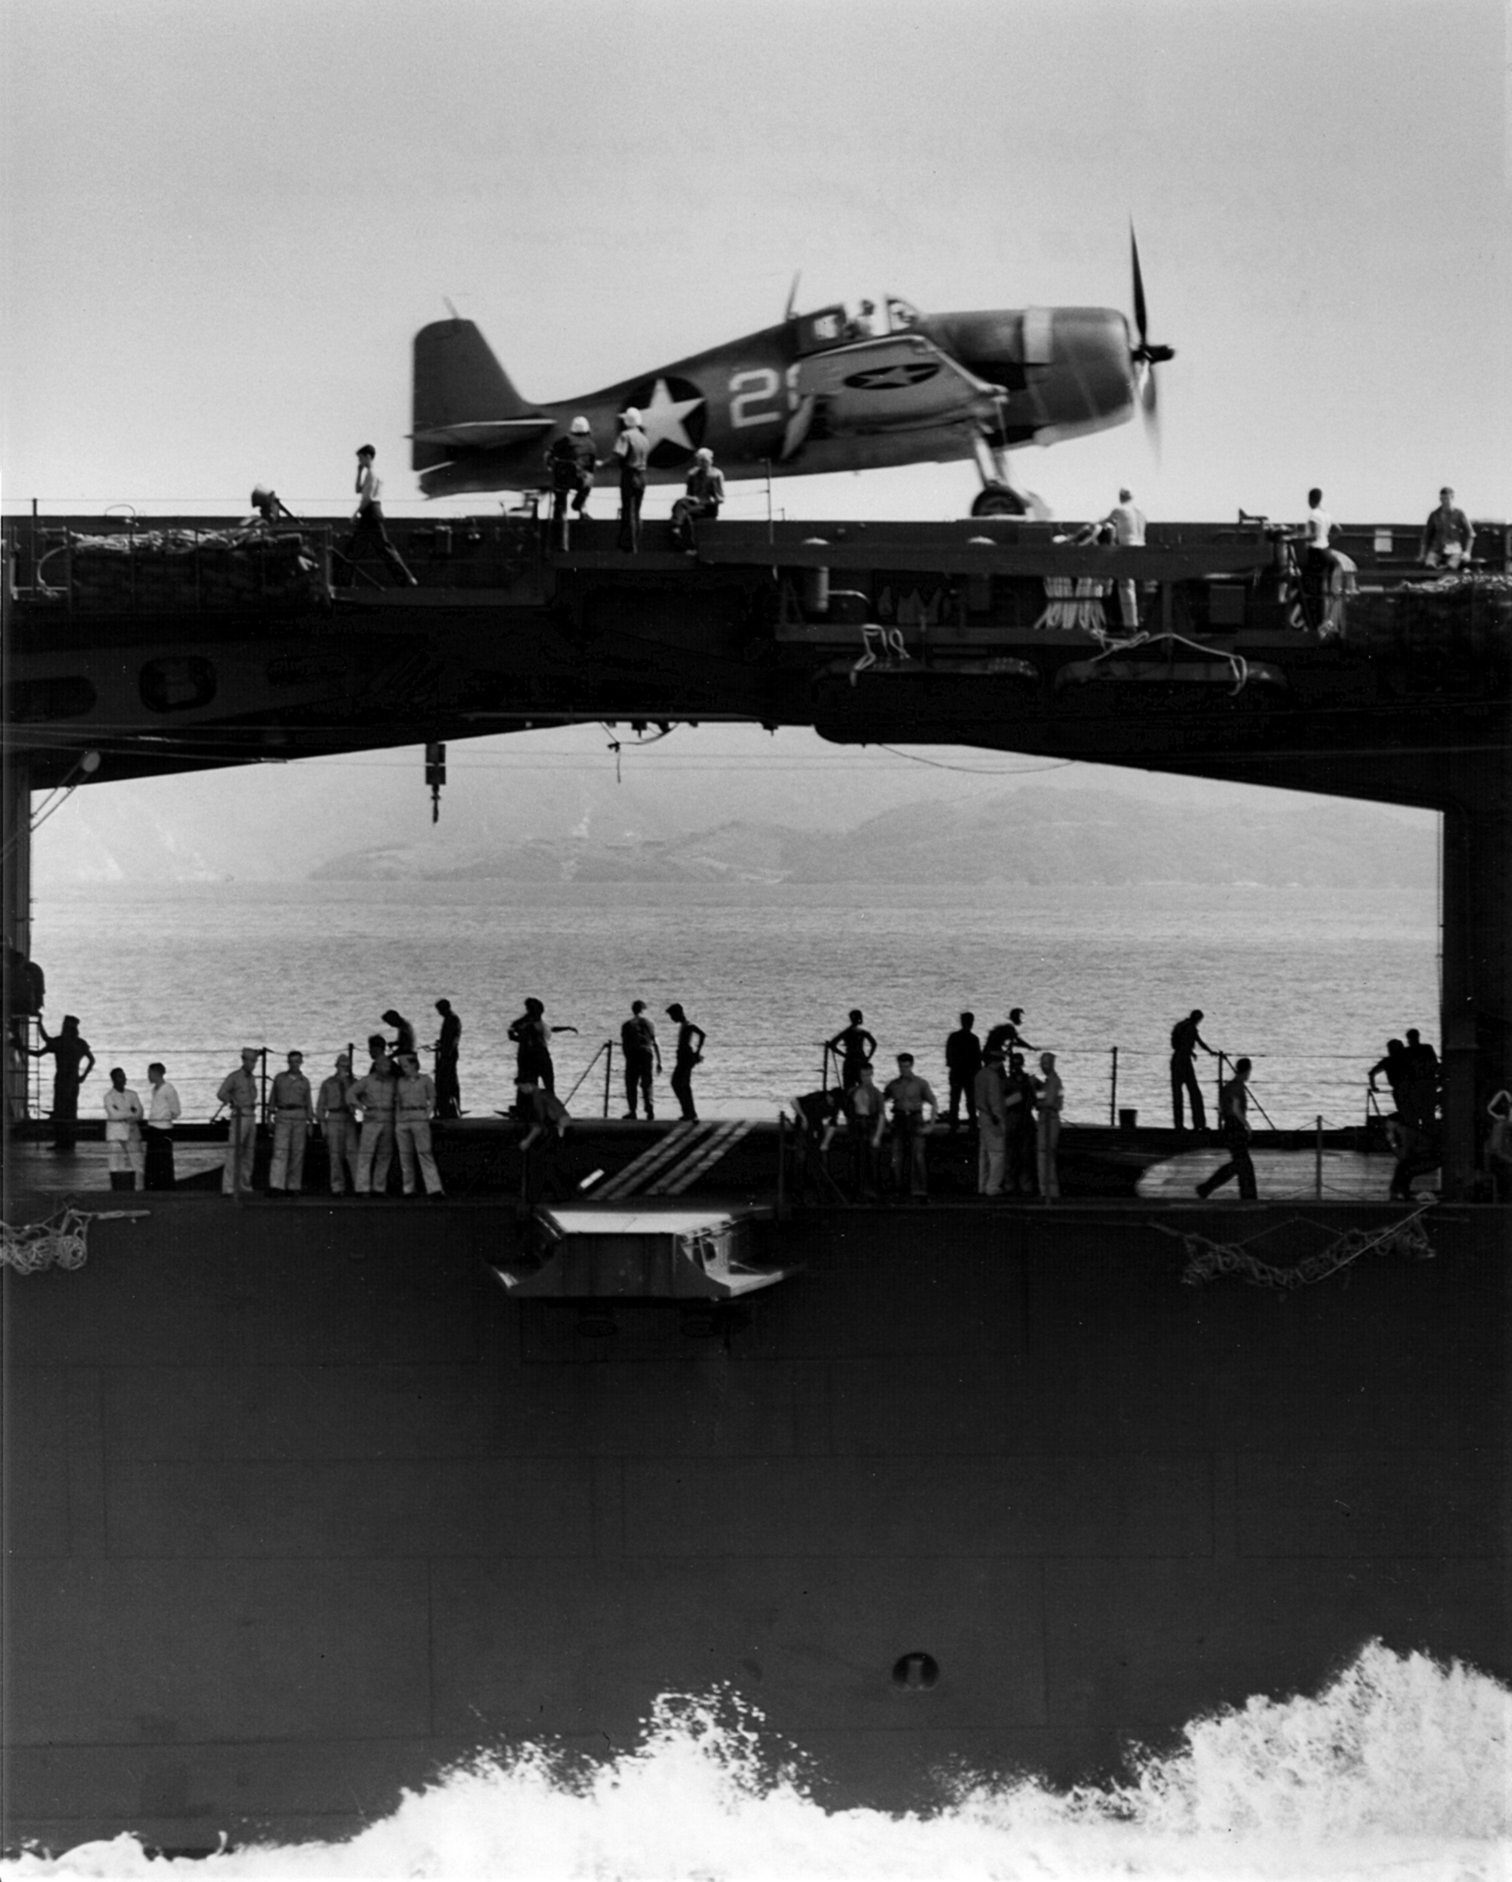 Starboard side view of the carrier Yorktown (Essex-class) with an F6F-3 Hellcat fighter of VF-1 on the fight deck above the athwartship hangar deck catapult, June 1943.